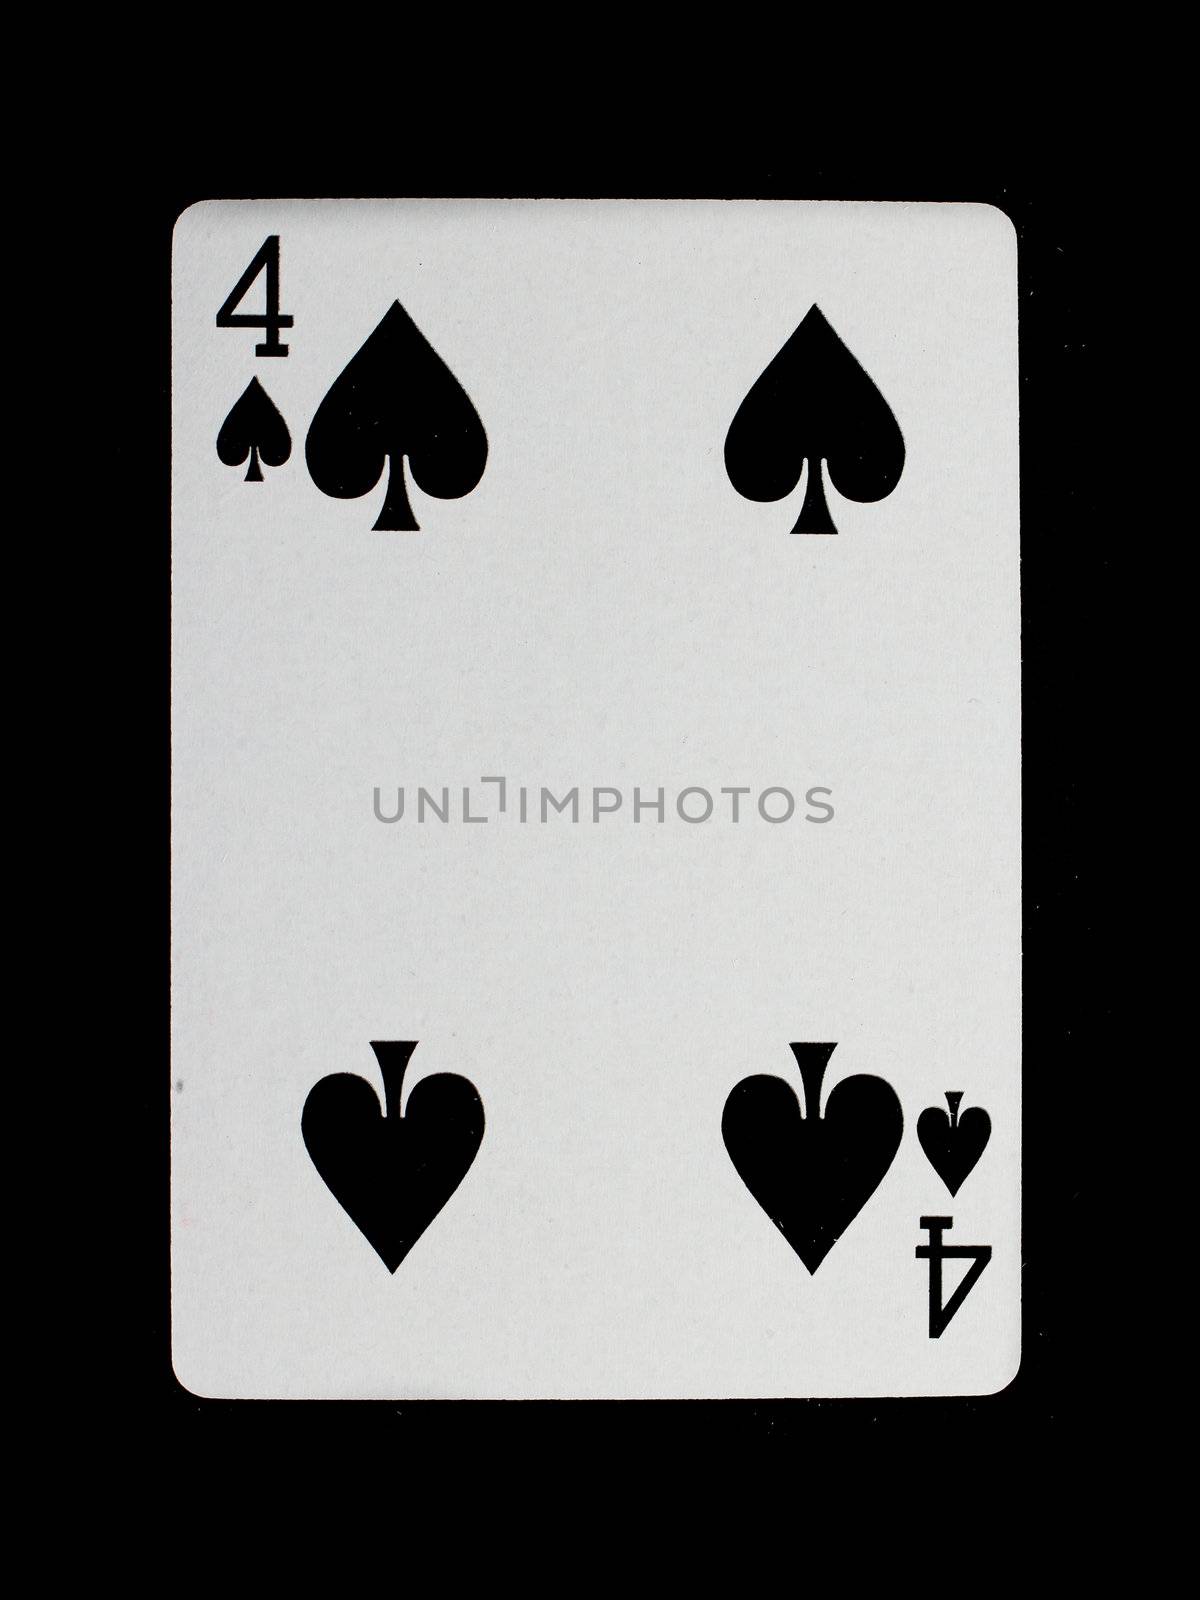 Old playing card (four) isolated on a black background